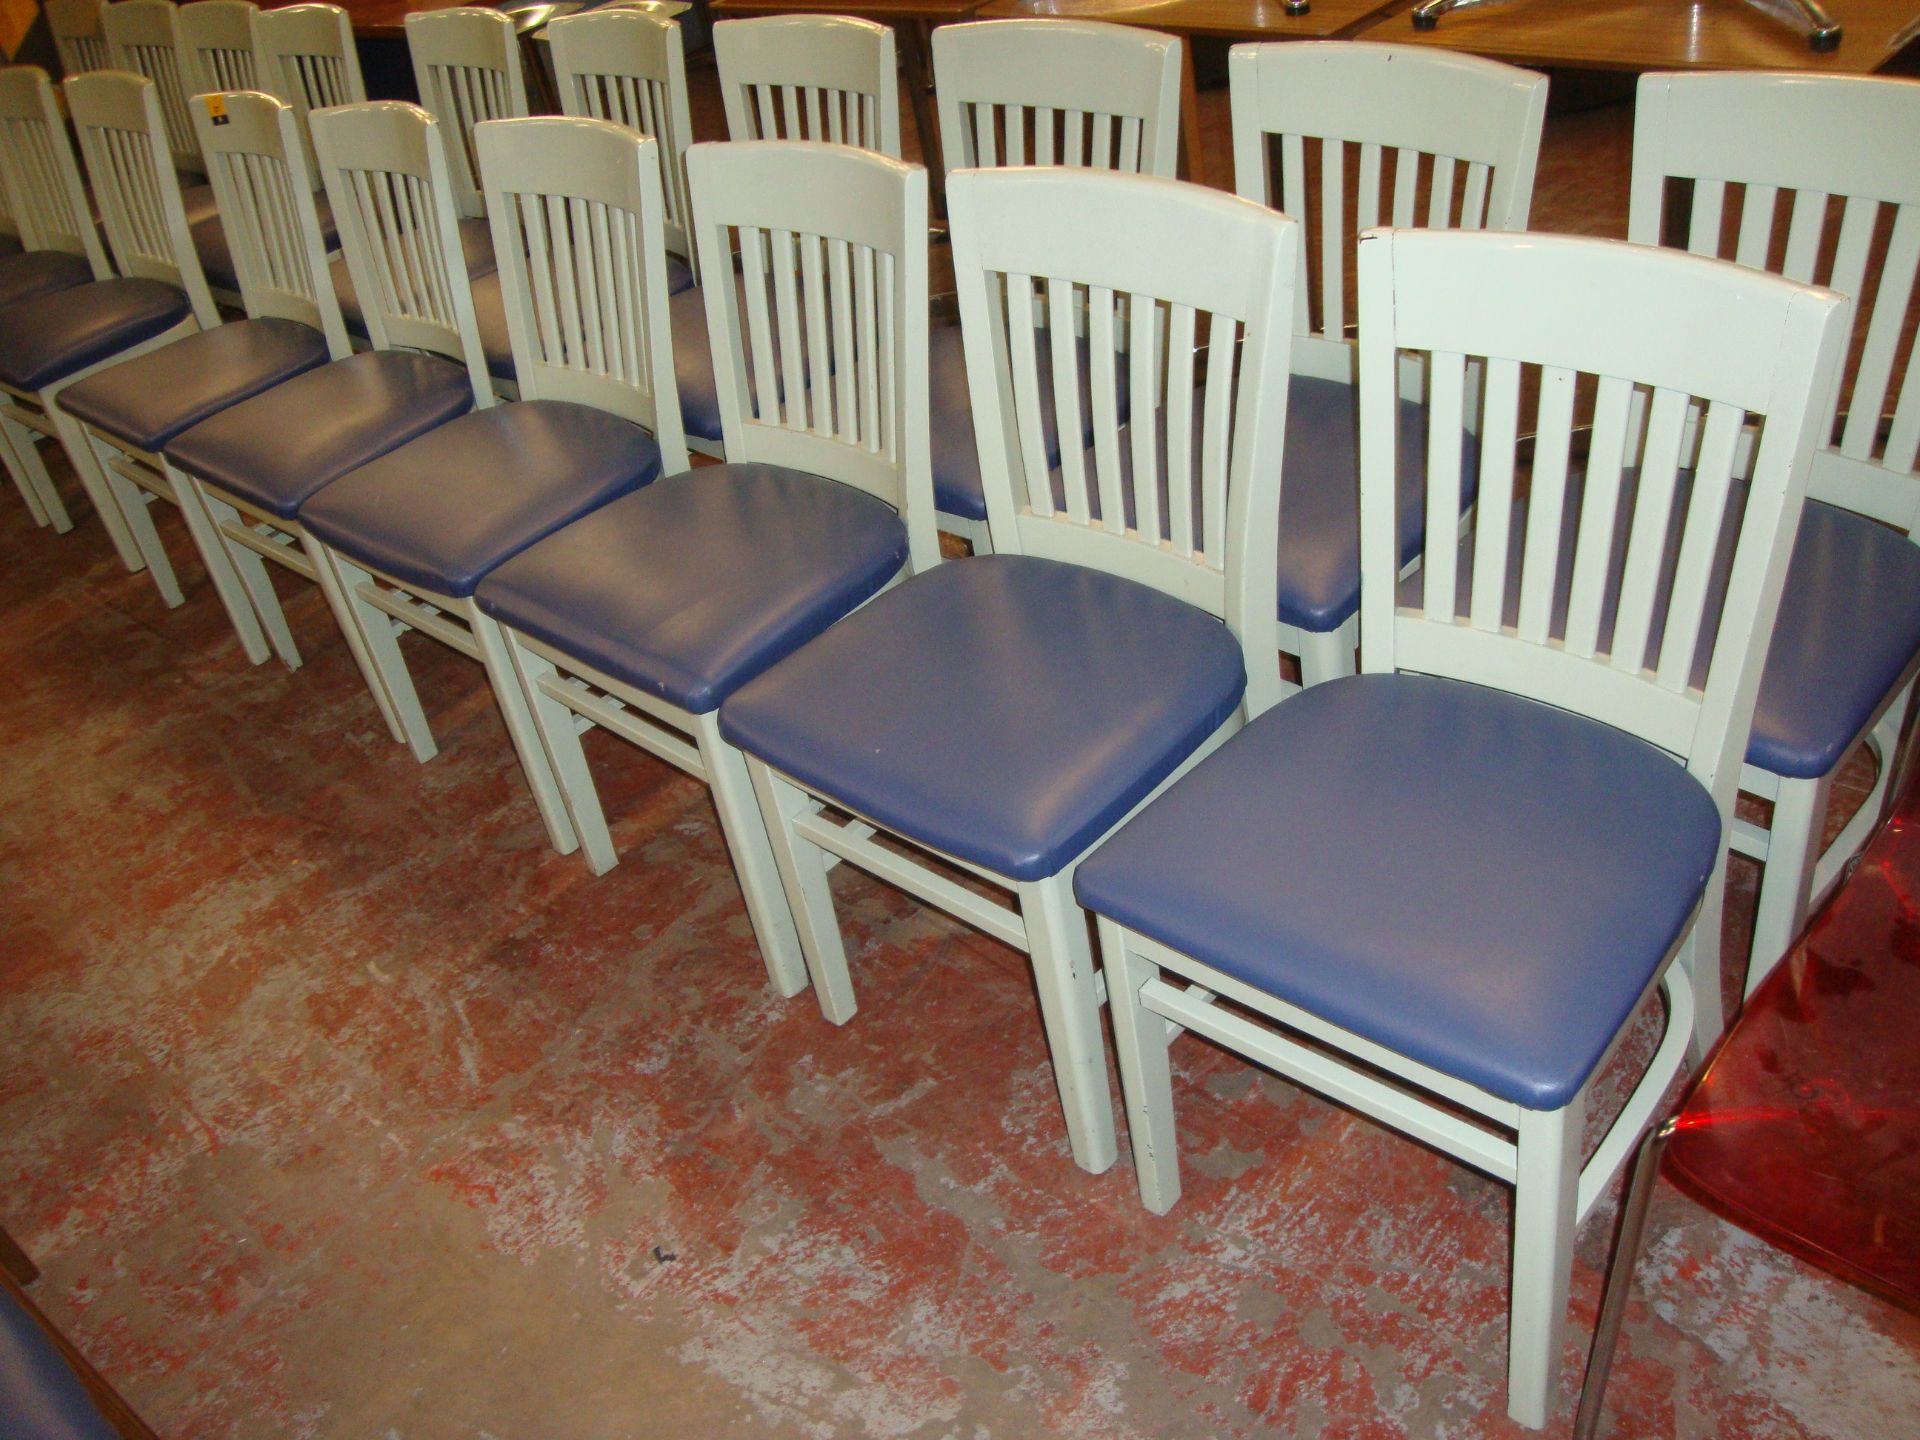 12 off pale green painted wooden chairs with blue upholstered seat bases. NB lots 131 - 137 - Image 3 of 3